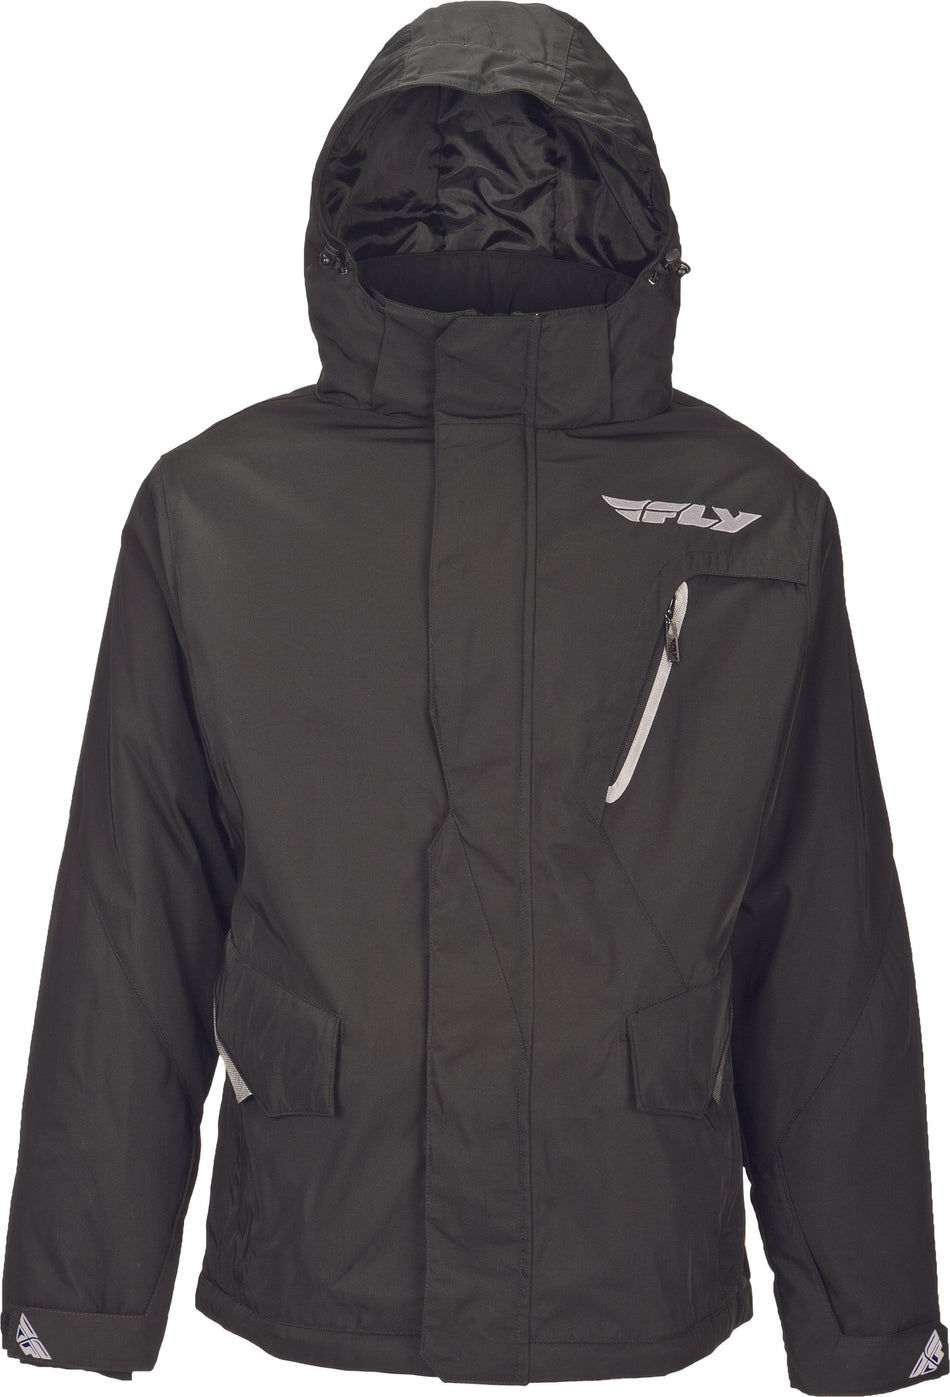 FLY RACING Composite Jacket Black Sm 354-6140S